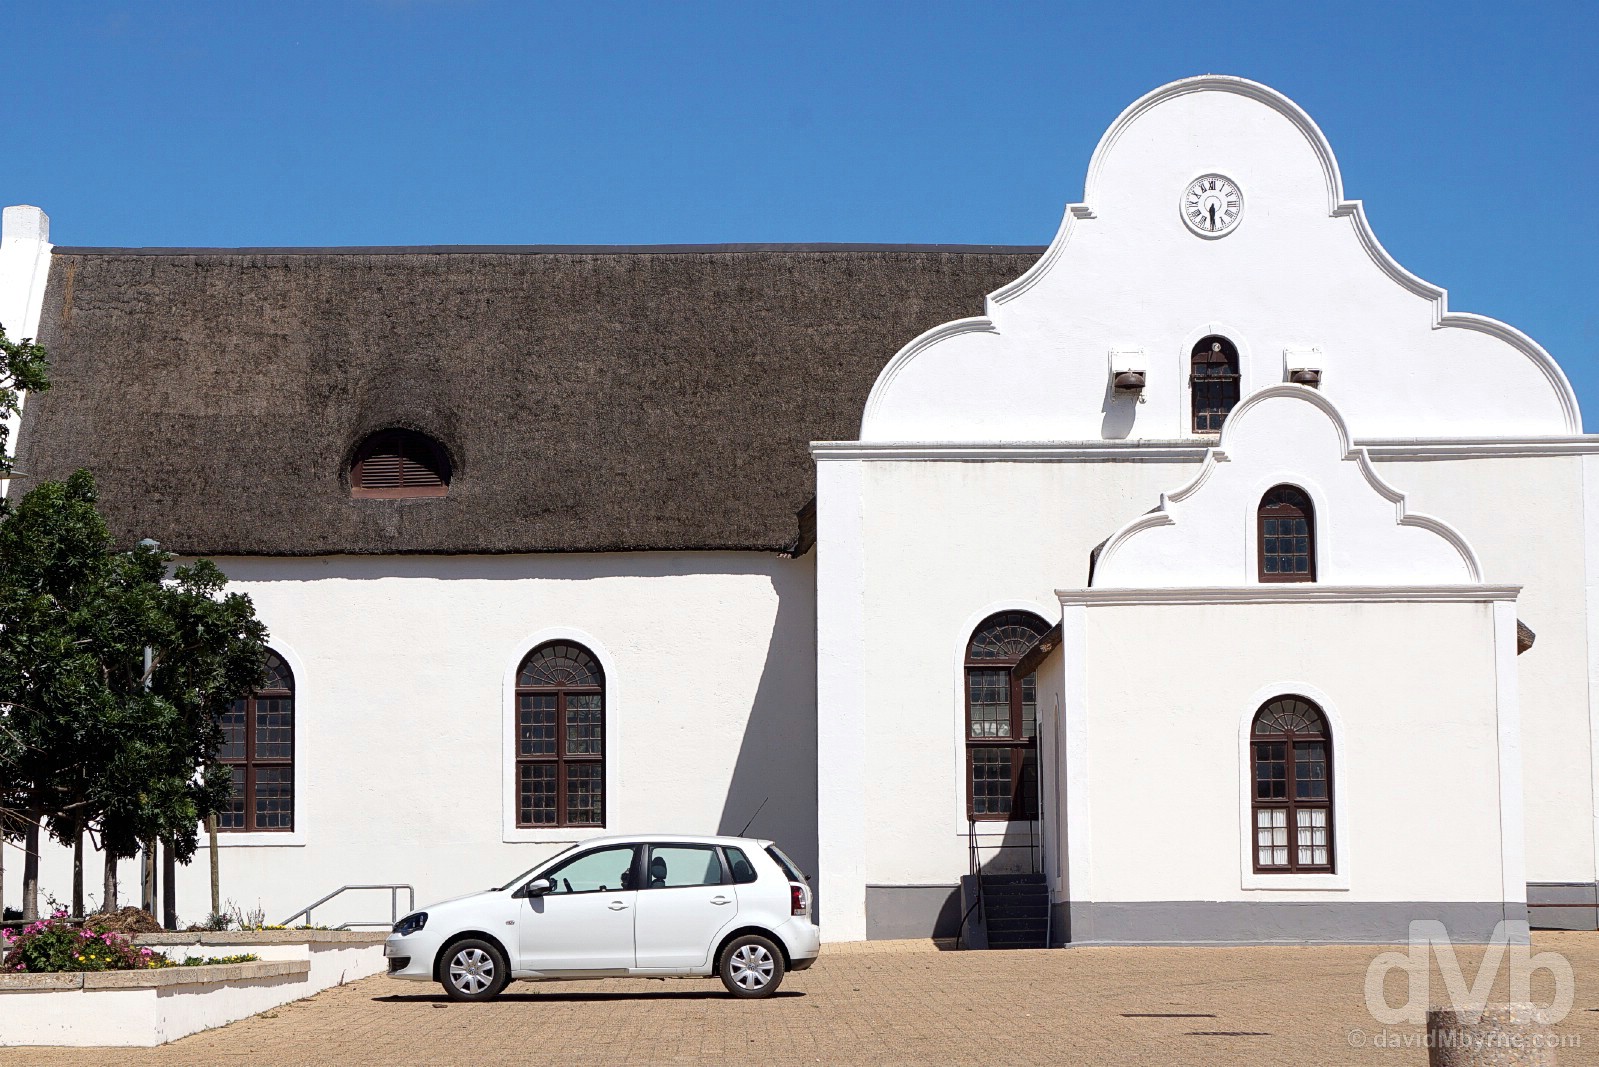 The church in Elim, Overberg, Western Cape, South Africa. February 21, 2017.